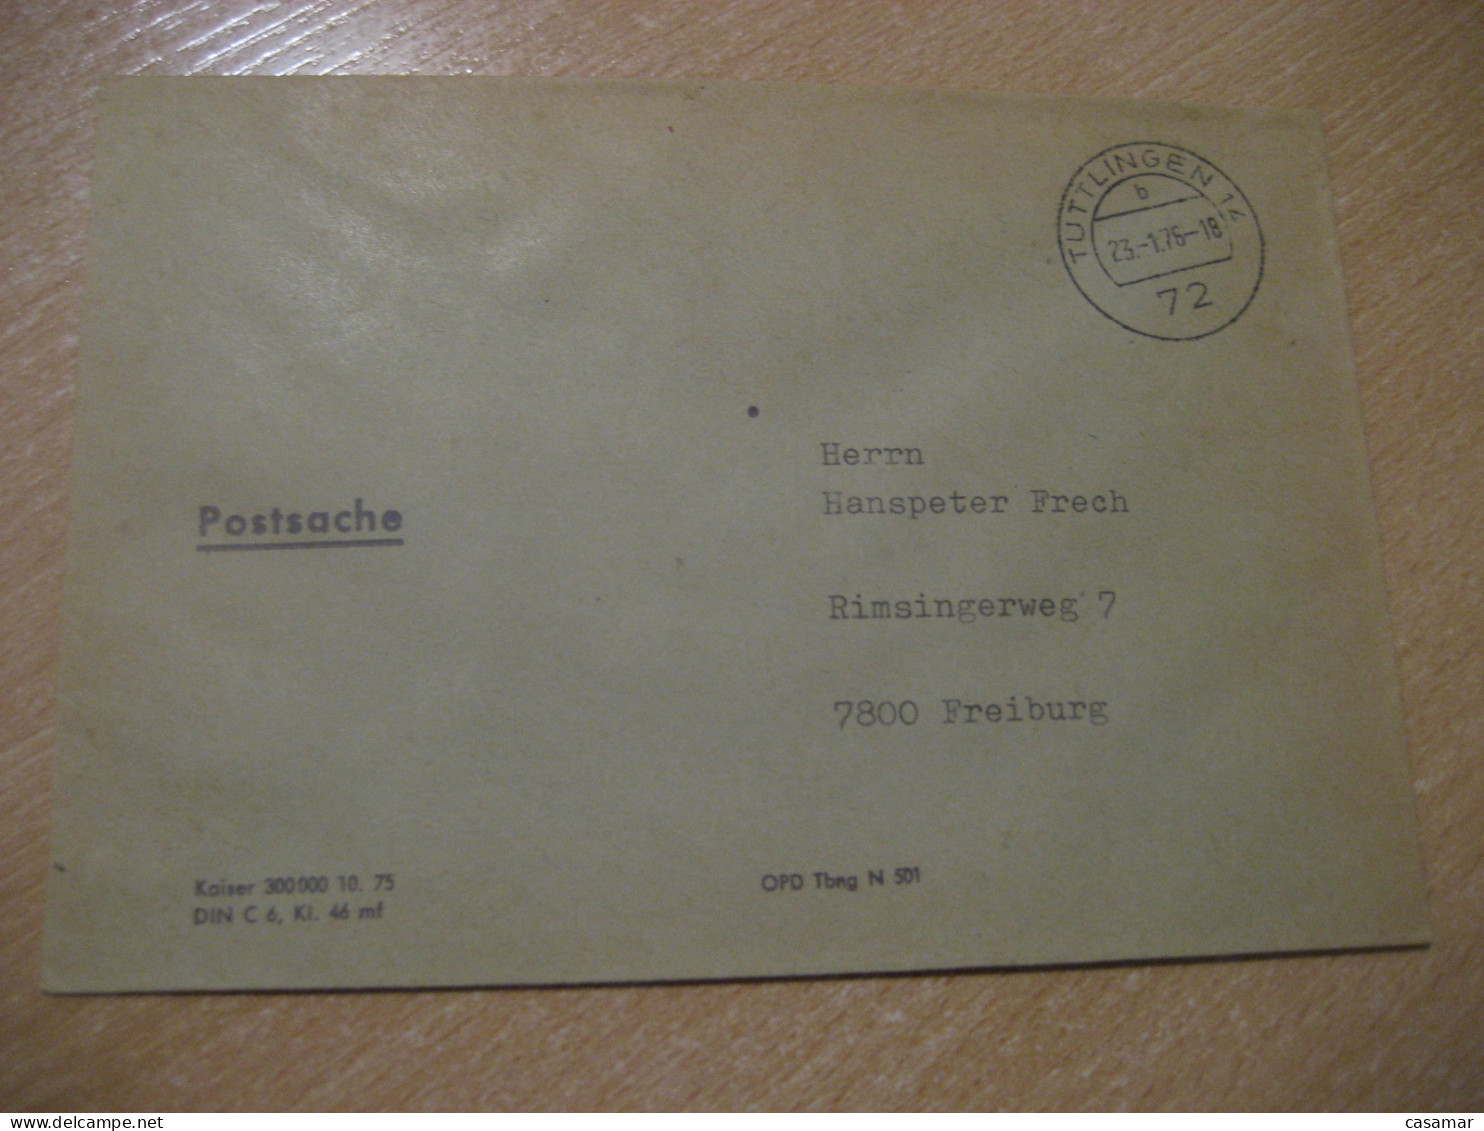 TUTTLINGEN 1976 To Freiburg Postage Paid Cancel Cover GERMANY - Covers & Documents